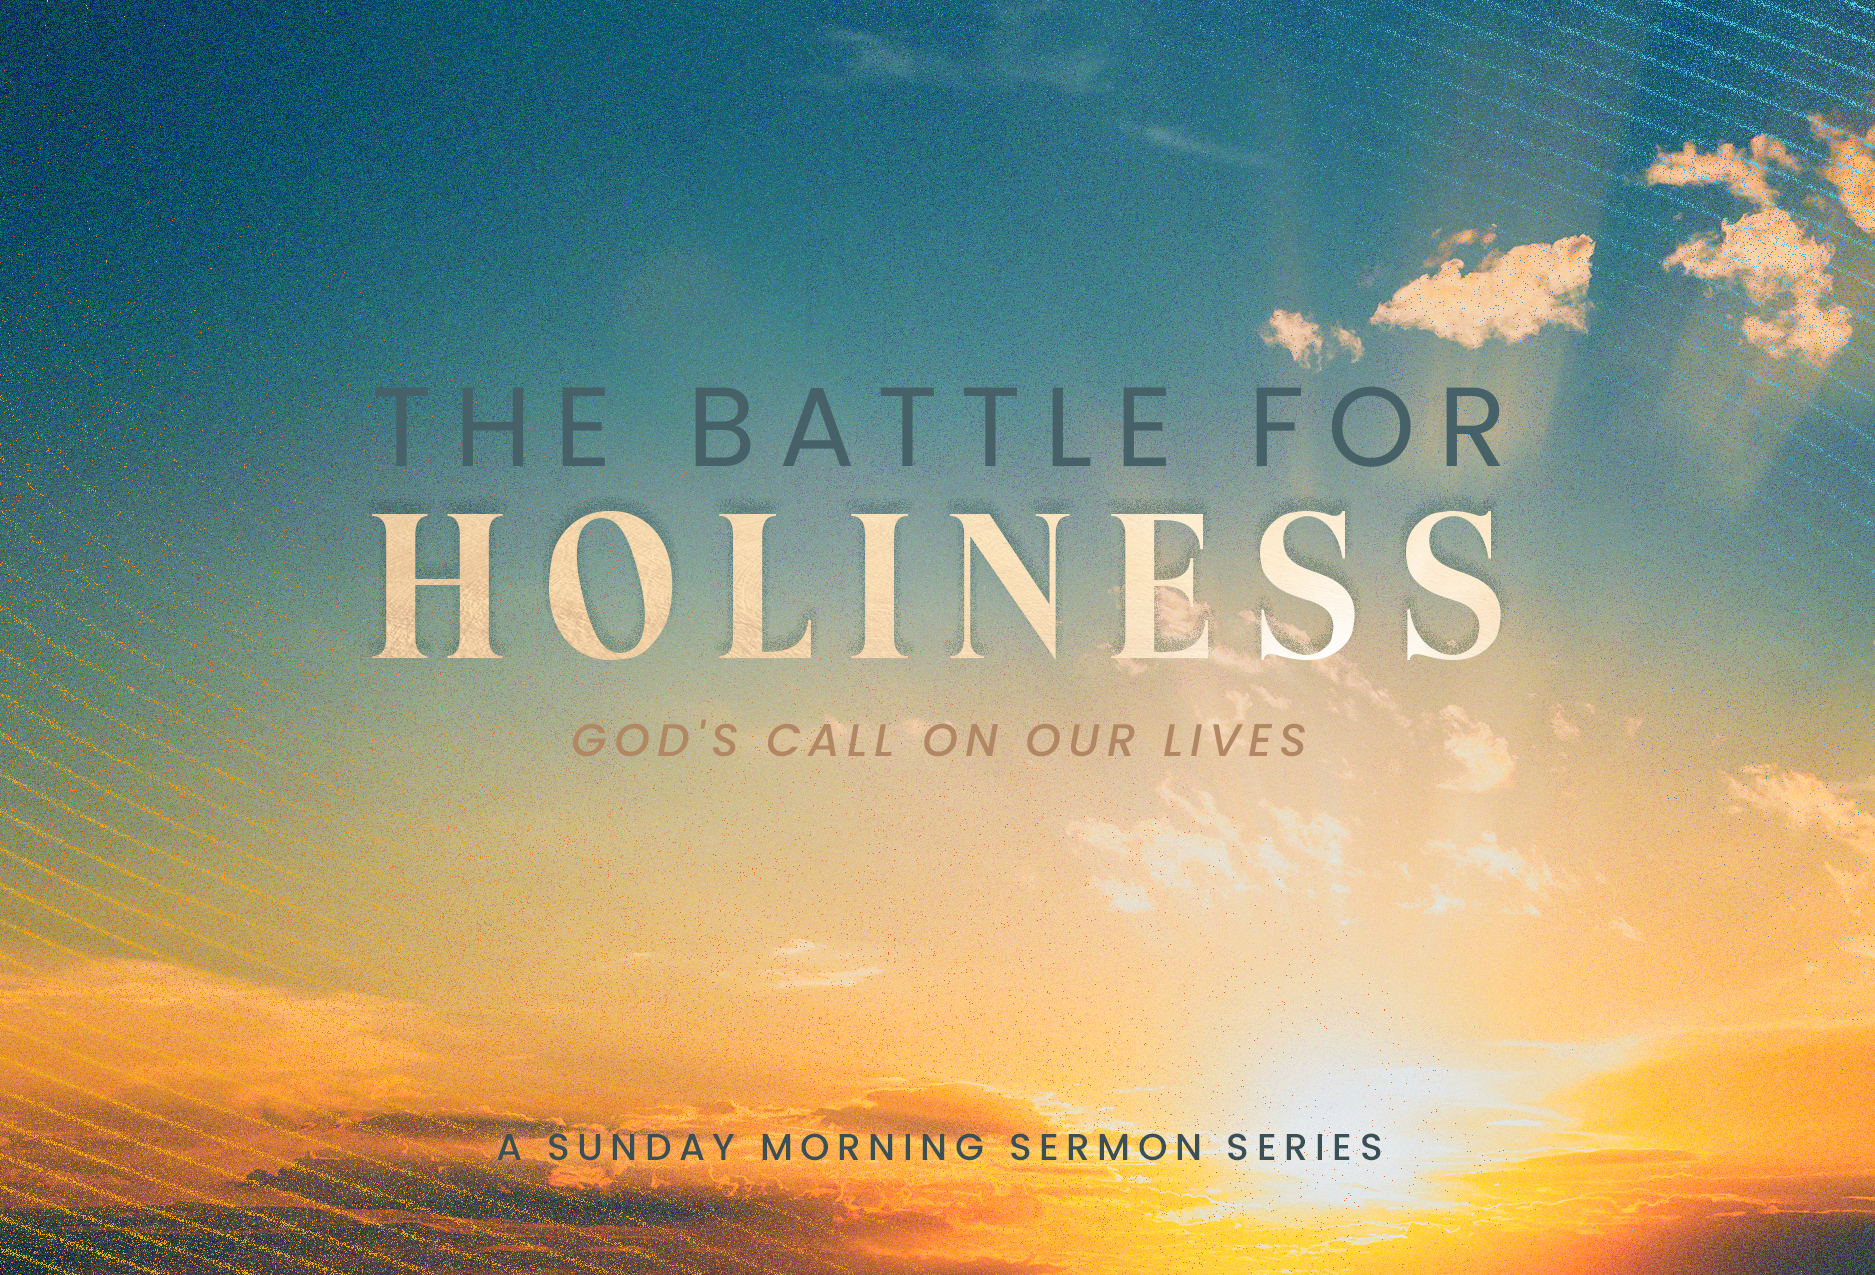 THE BATTLE FOR HOLINESS | PREPARE FOR BATTLE